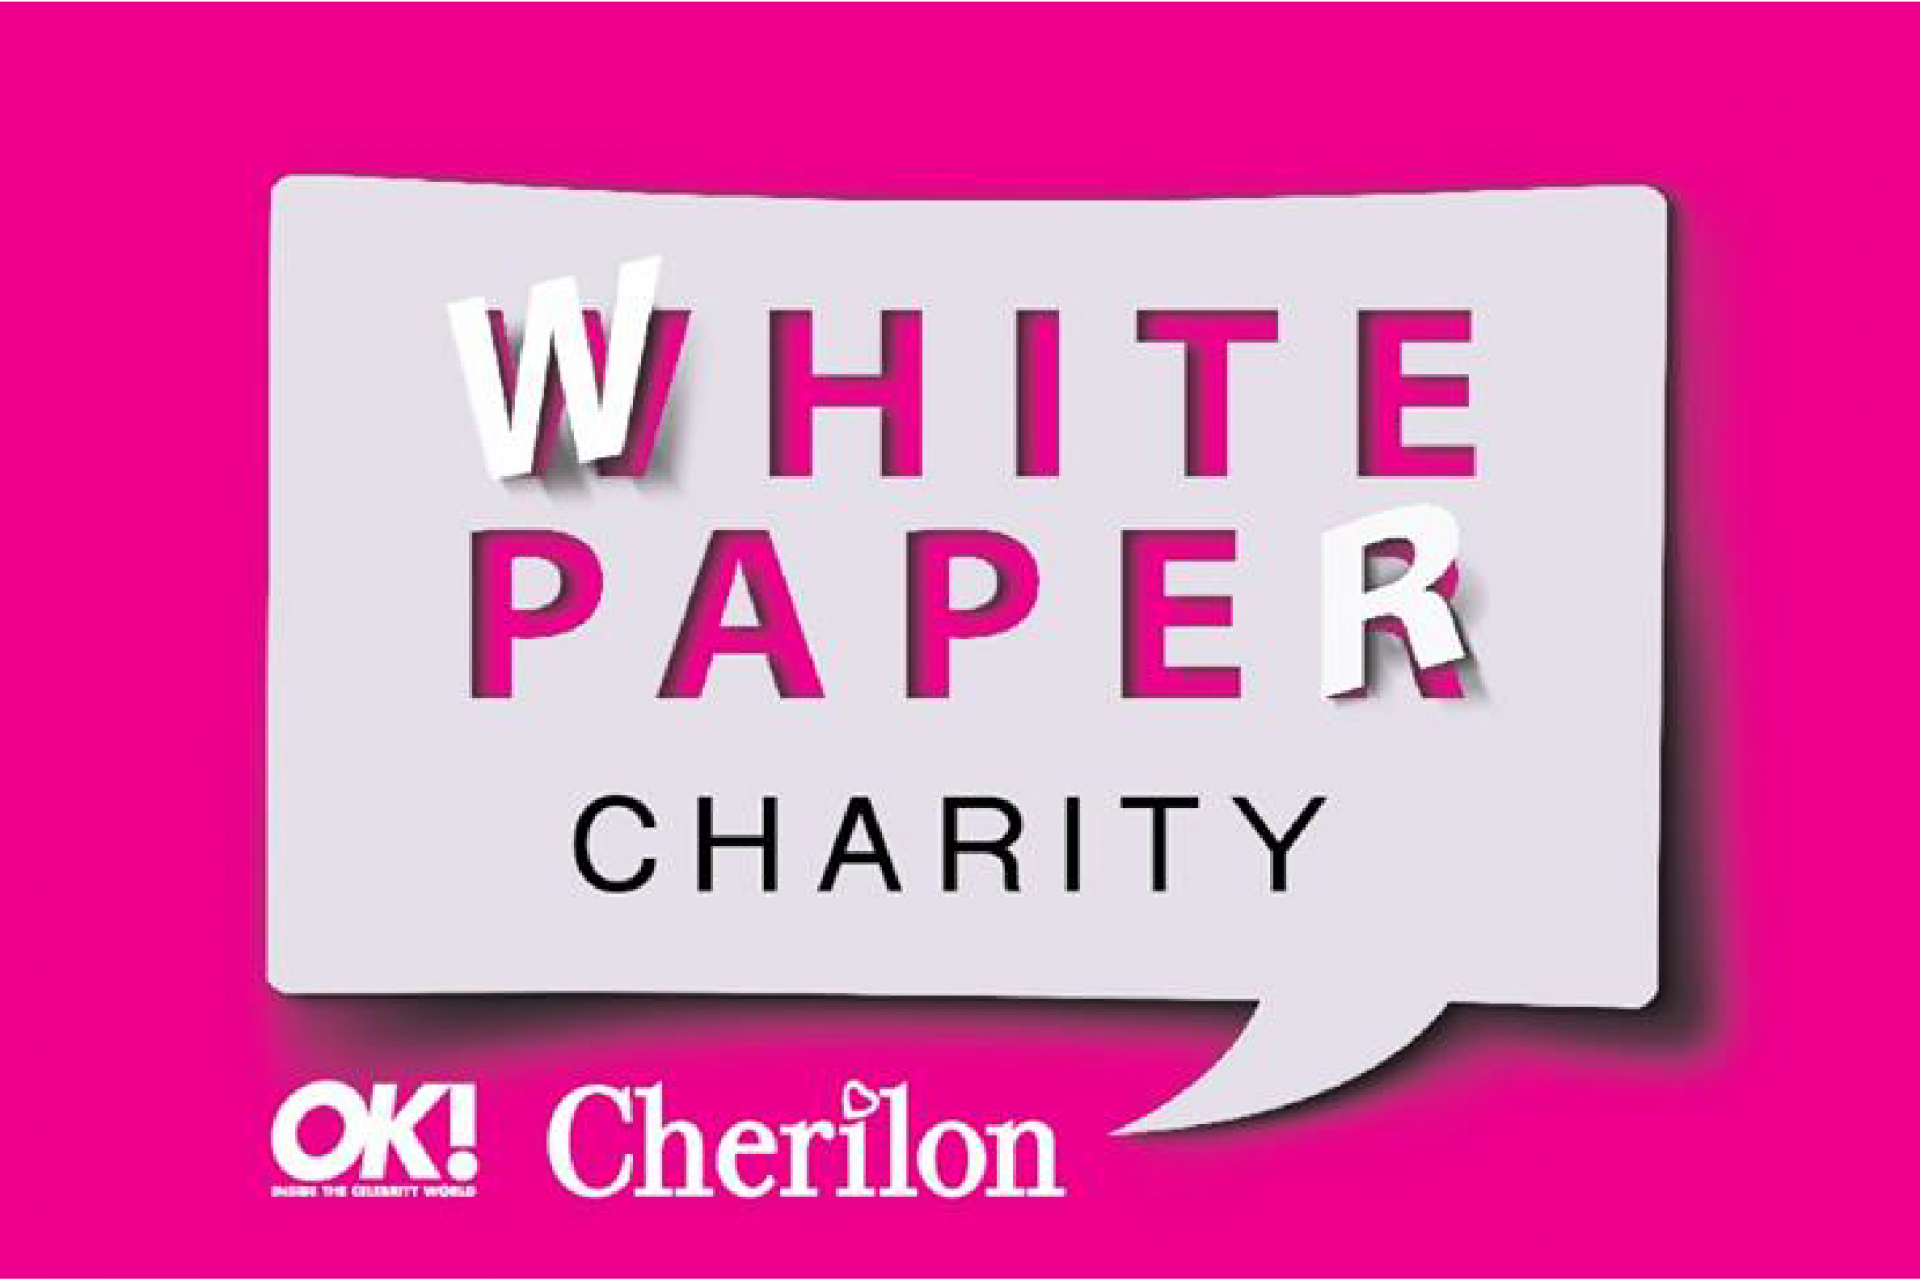 WHITE PAPER CHARITY